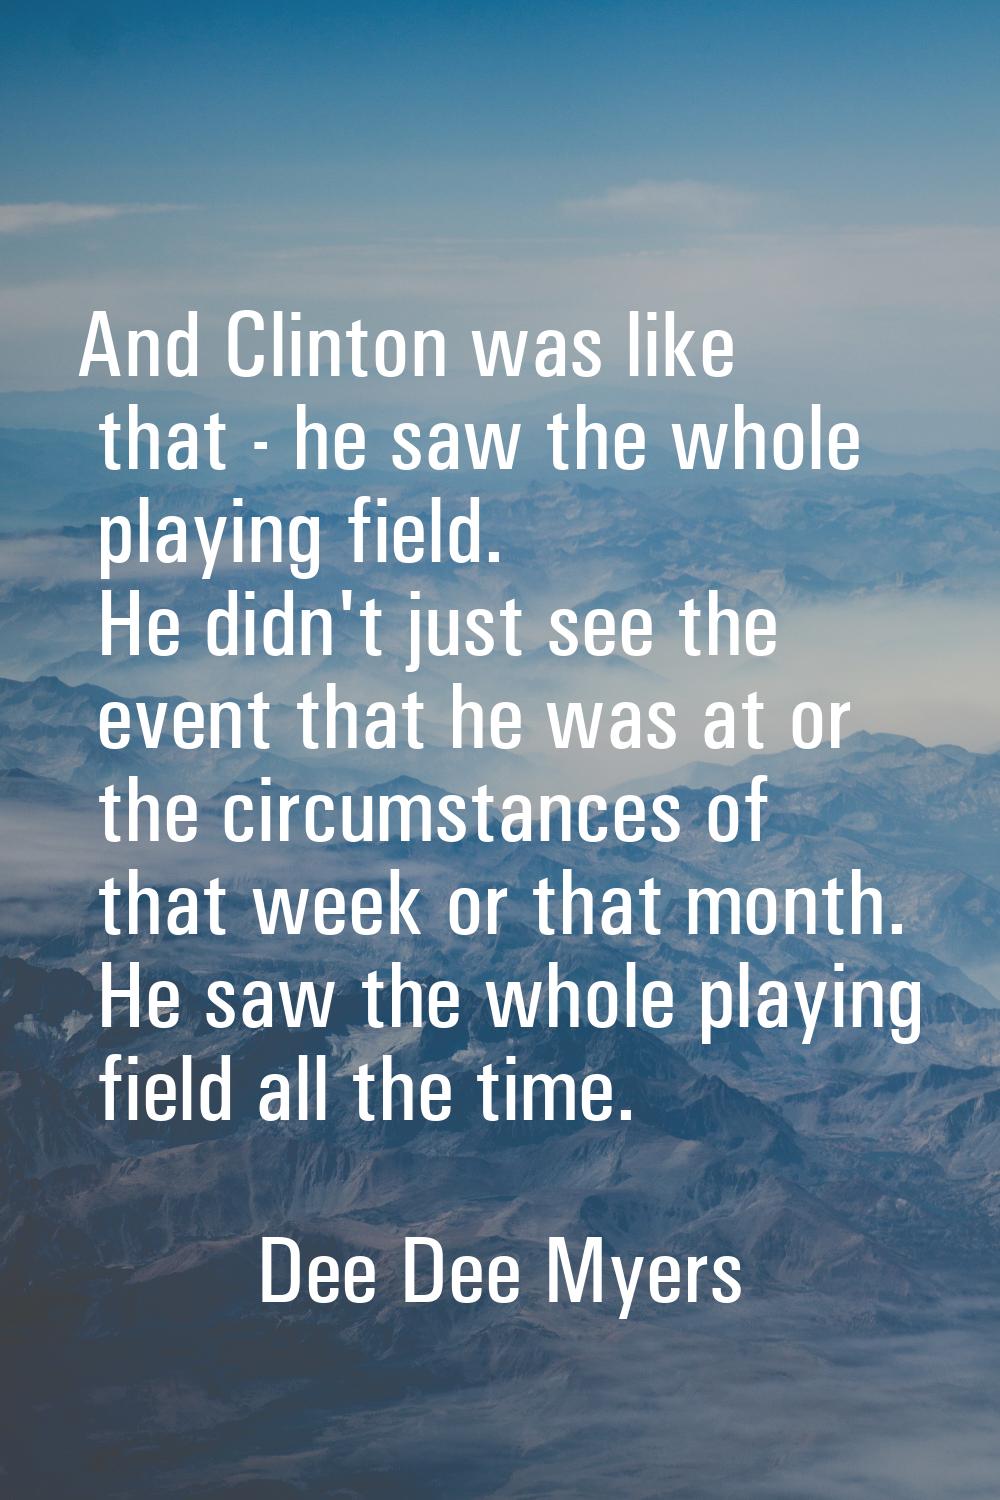 And Clinton was like that - he saw the whole playing field. He didn't just see the event that he wa